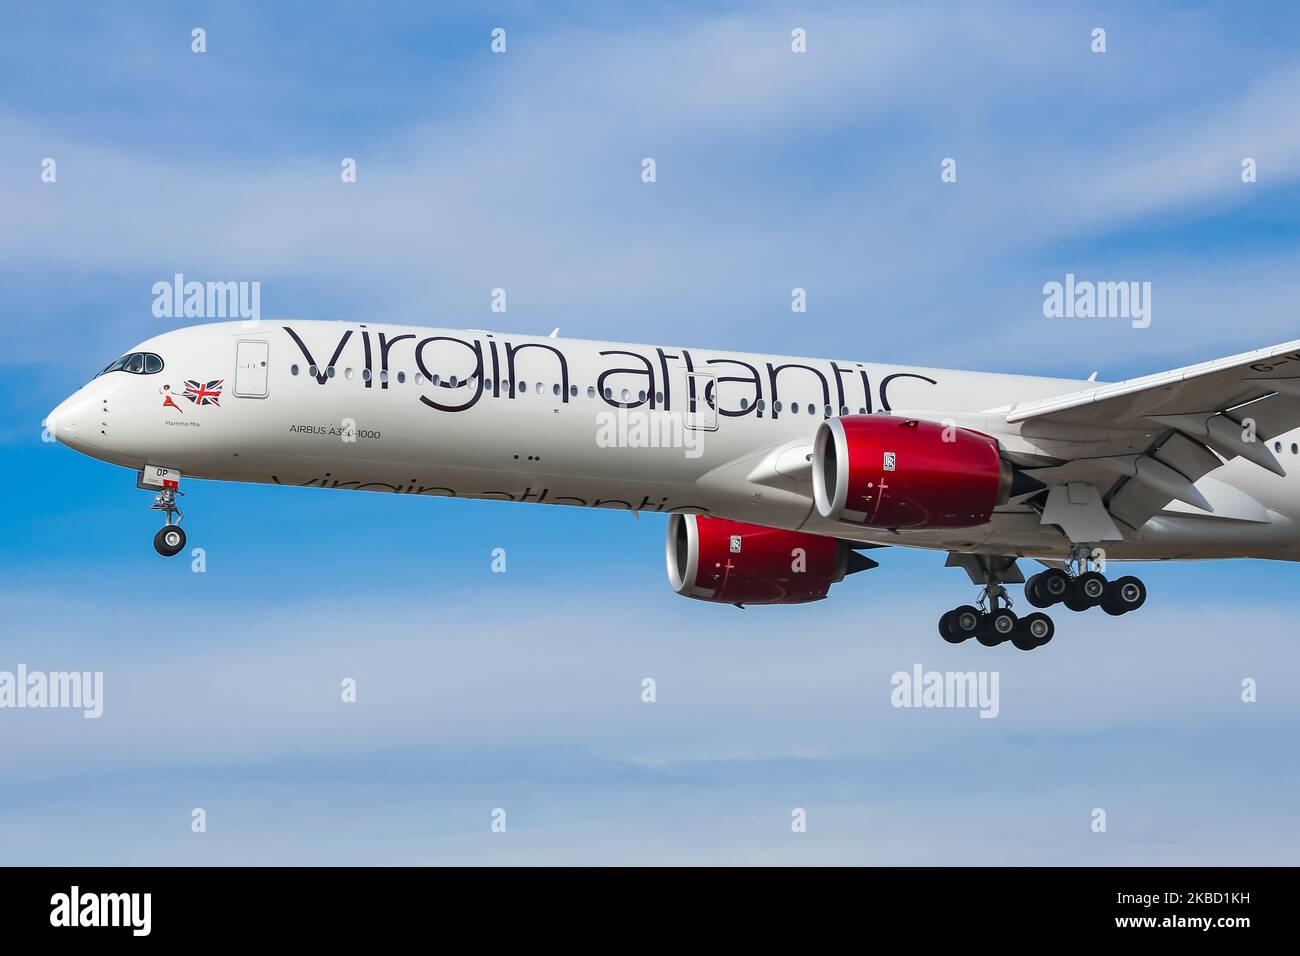 Virgin Atlantic Airways Airbus A350-1000 aircraft as seen on final approach arriving and landing at JFK John F. Kennedy International Airport in NYC, New York, USA. The airplane has the registration G-VPOP, the name Mamma Mia, 2x RR Jet engines. Virgin Atlantic Airways VS VIR is a British Airline Carrier connecting New York City to the London Gatwick, London Heathrow and Manchester UK. (Photo by Nicolas Economou/NurPhoto) Stock Photo